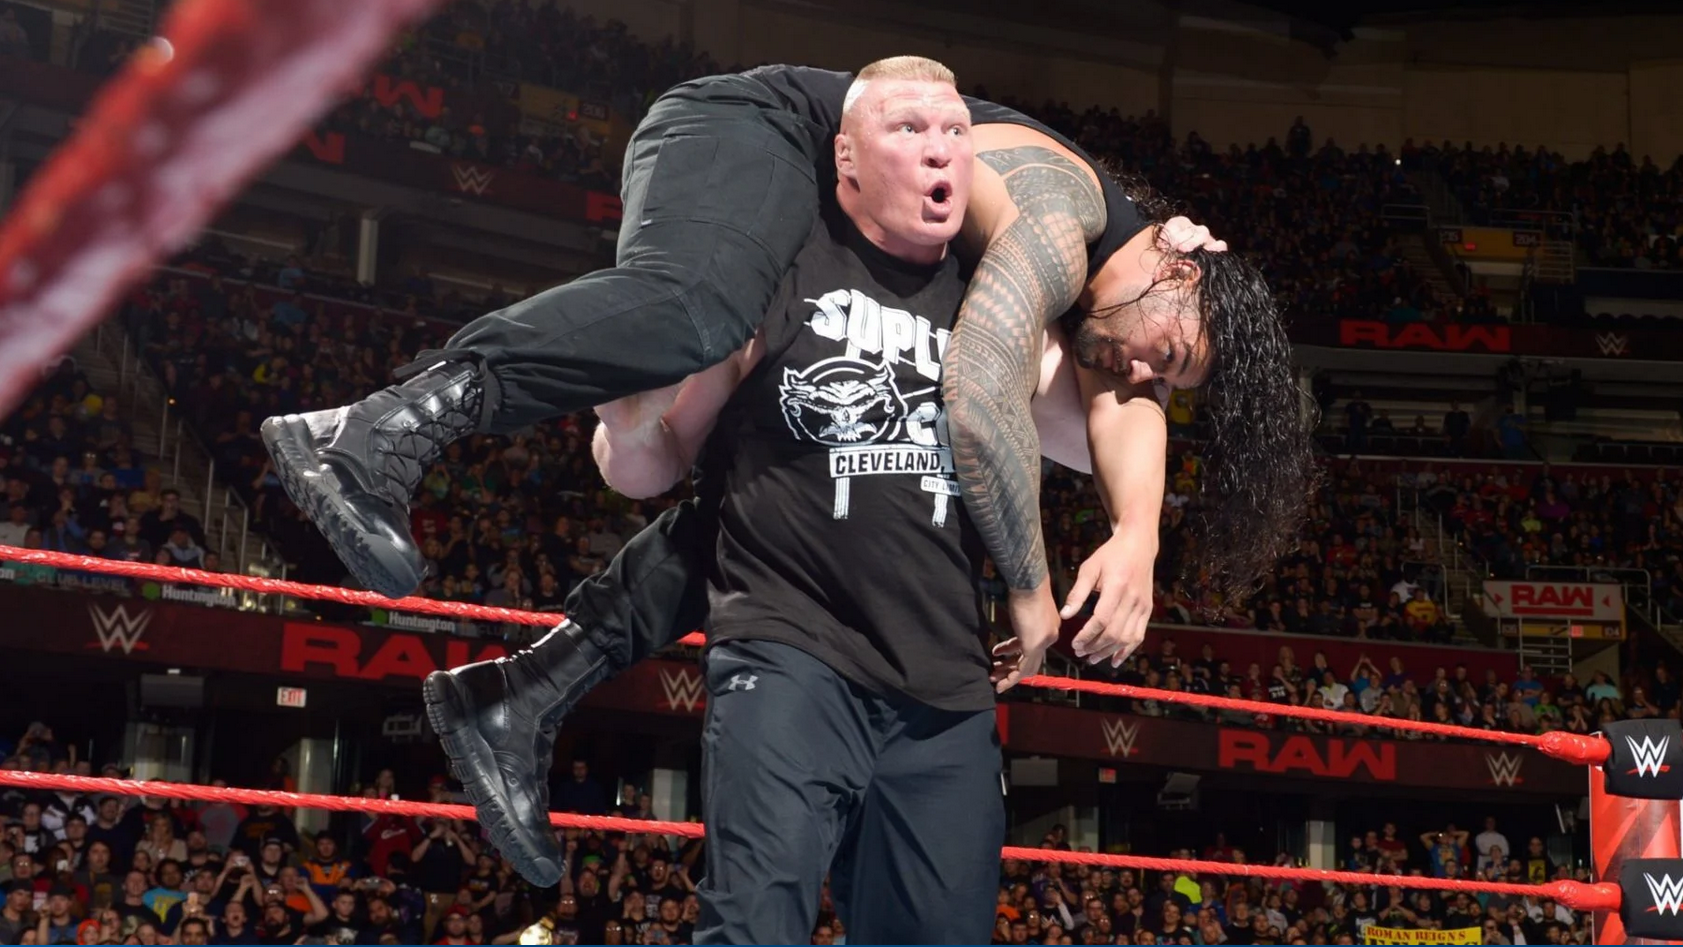 Roman Reigns vs. Brock Lesnar ‘On The Table’ For Future WrestleMania